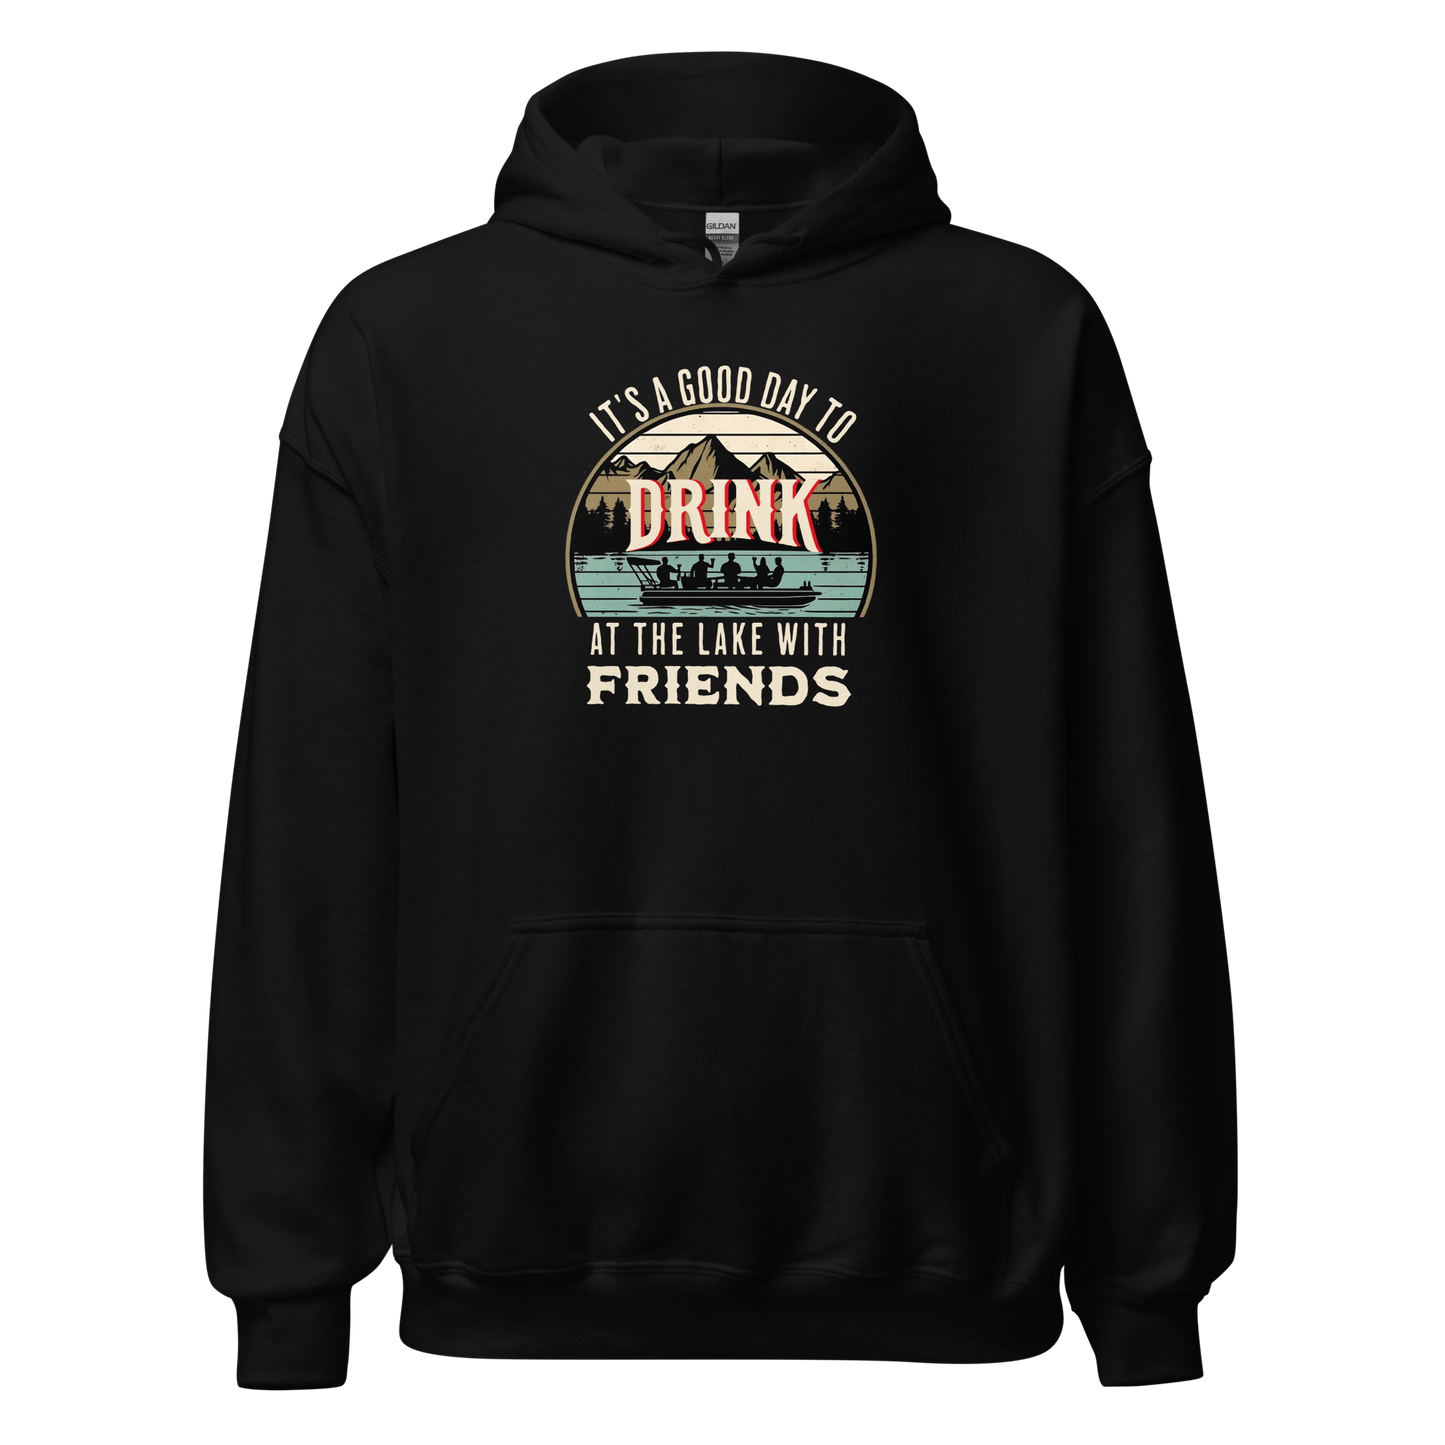 Hoodie with "It's a Good Day to Drink at the Lake with Friends," depicting people on a boat, lake and mountain scenery.